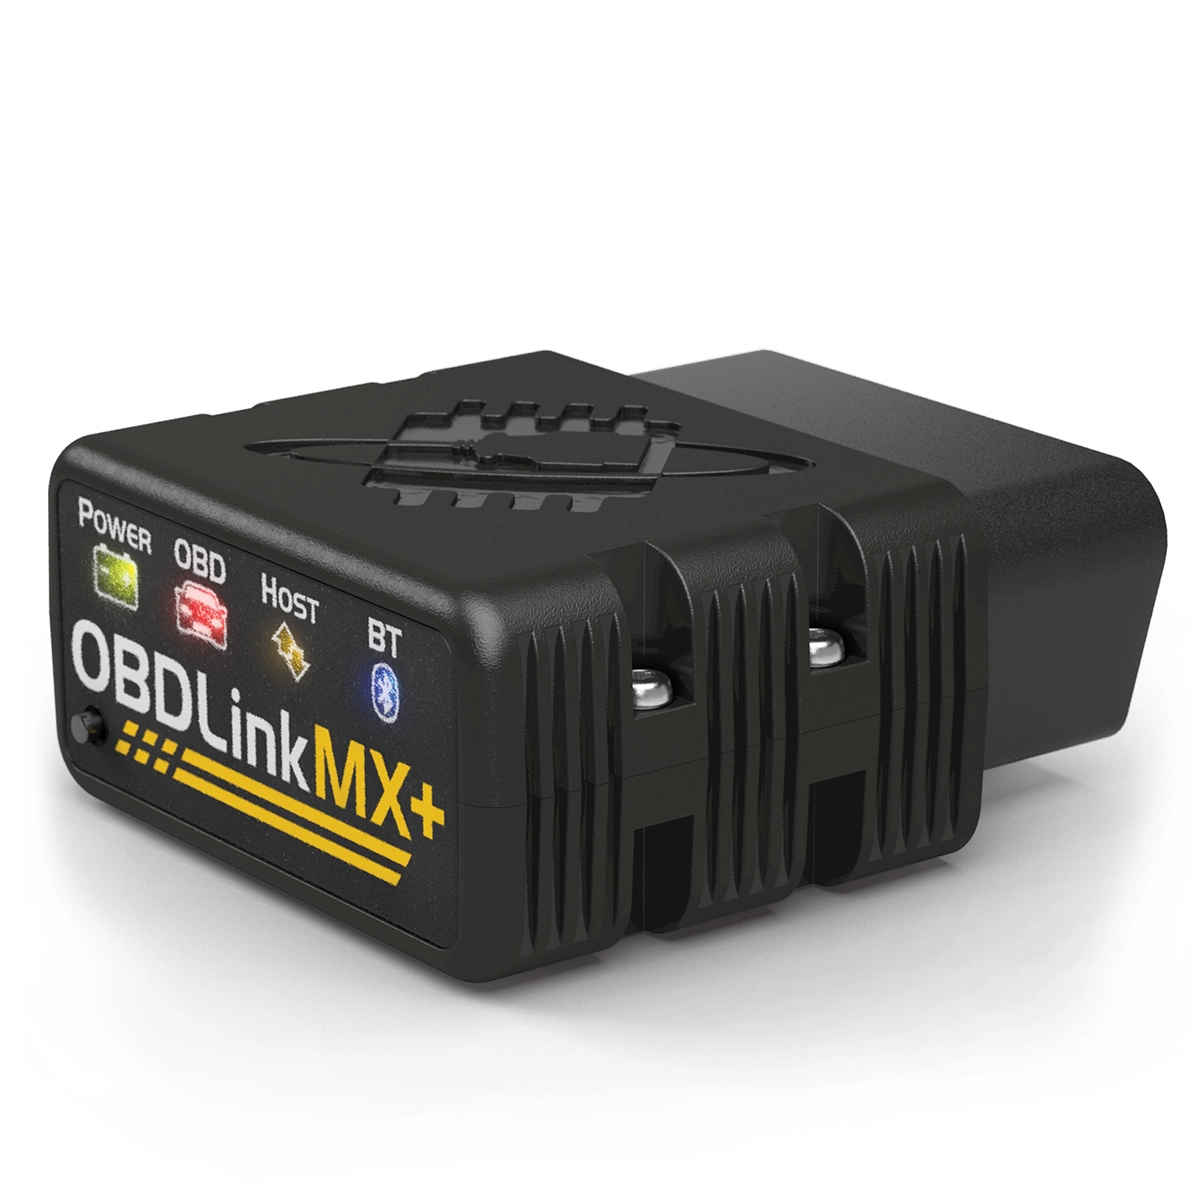 Products - Diagnostic USB to OBD2 Scan Tools